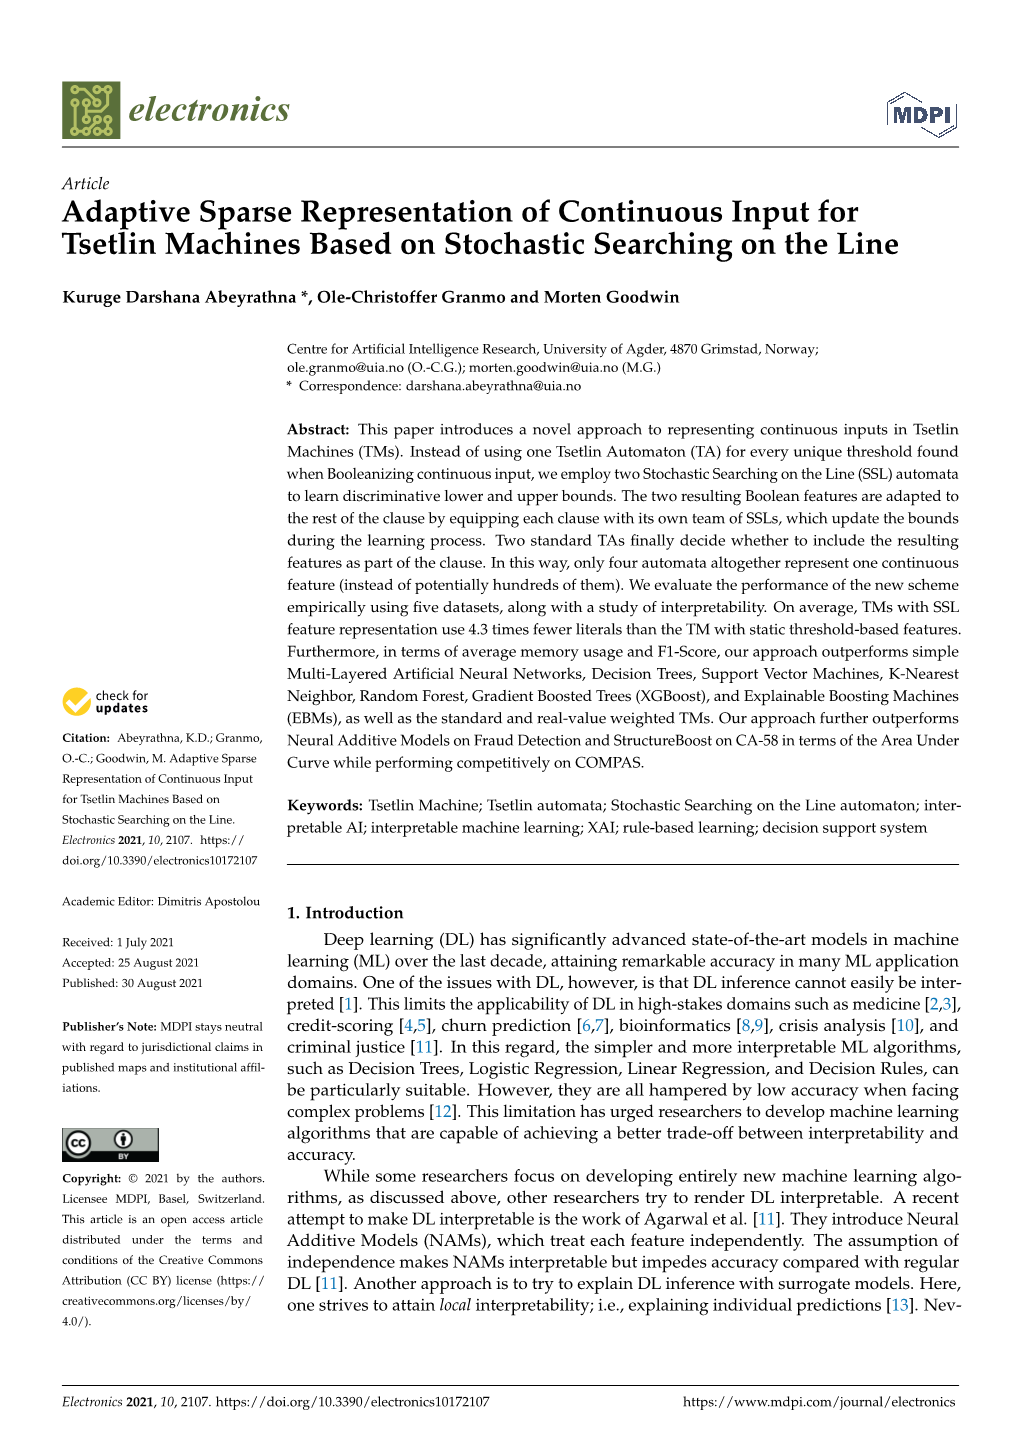 Adaptive Sparse Representation of Continuous Input for Tsetlin Machines Based on Stochastic Searching on the Line